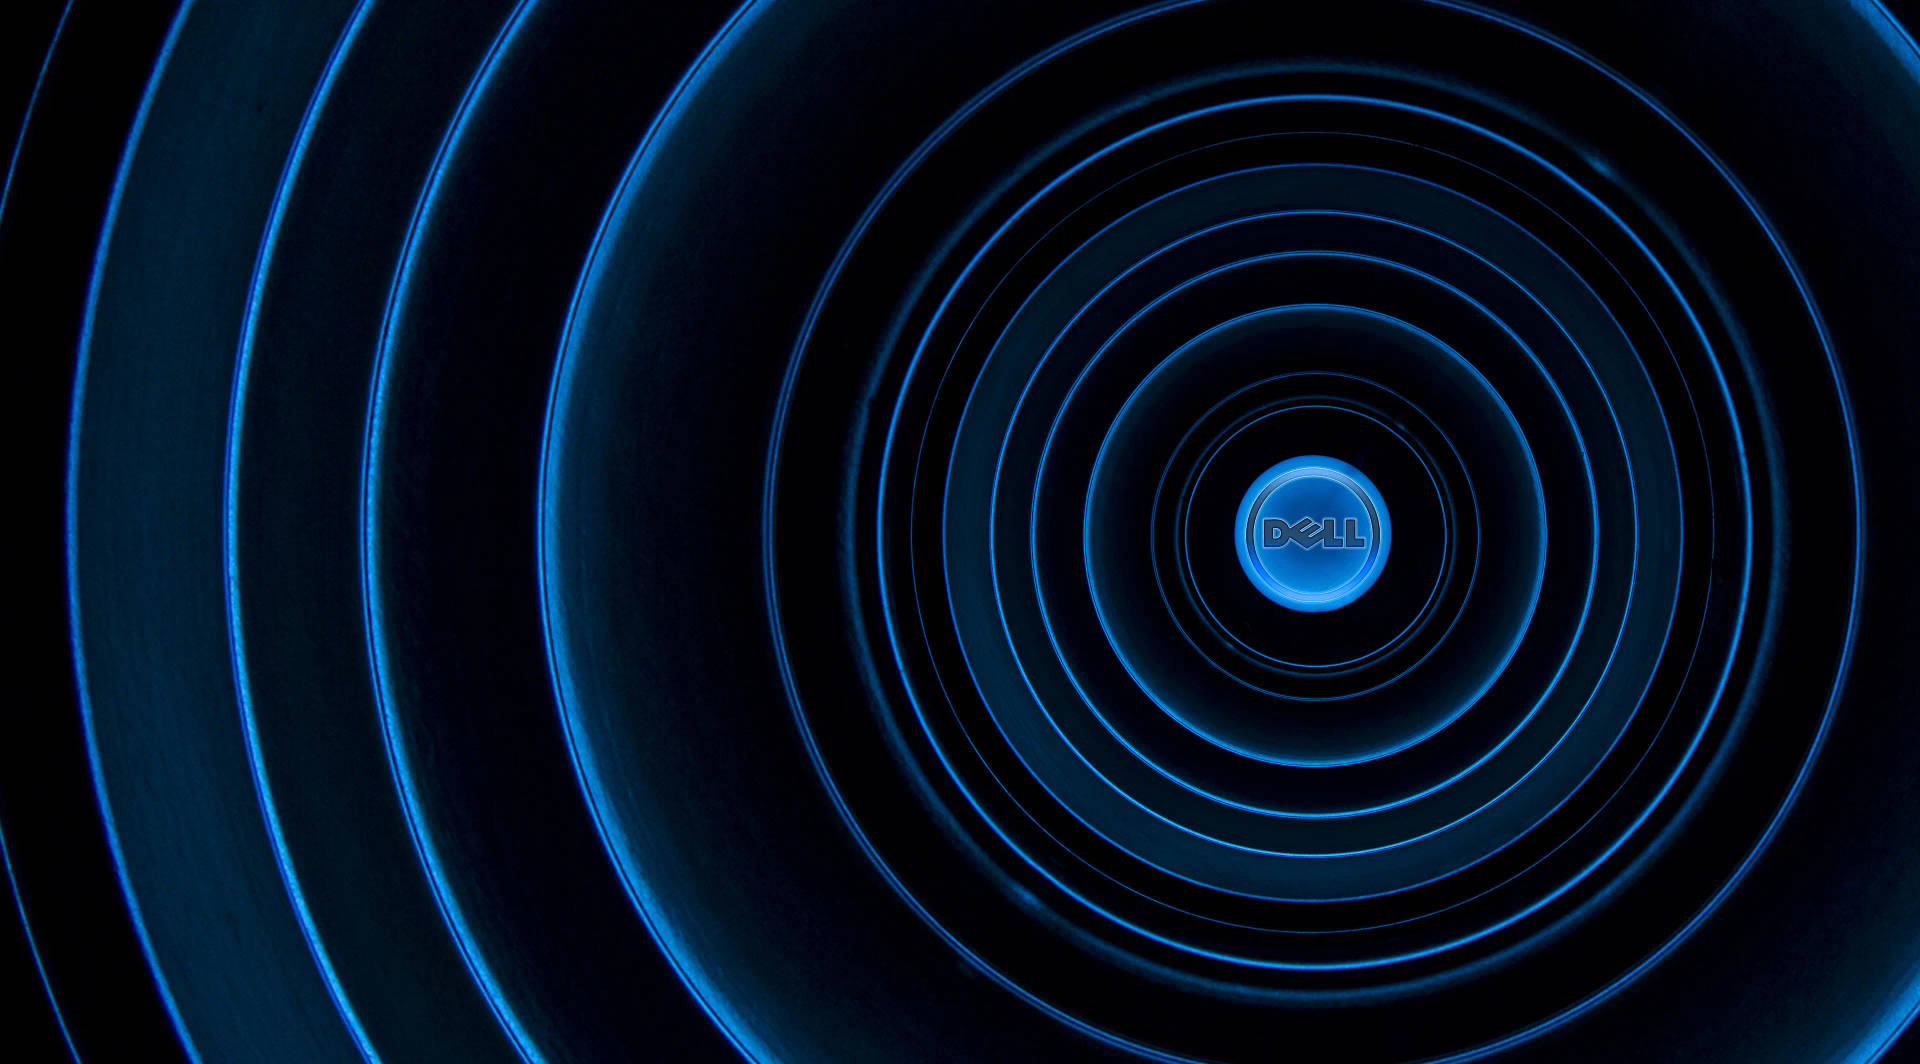 Dell 4k Logo In Circles Background